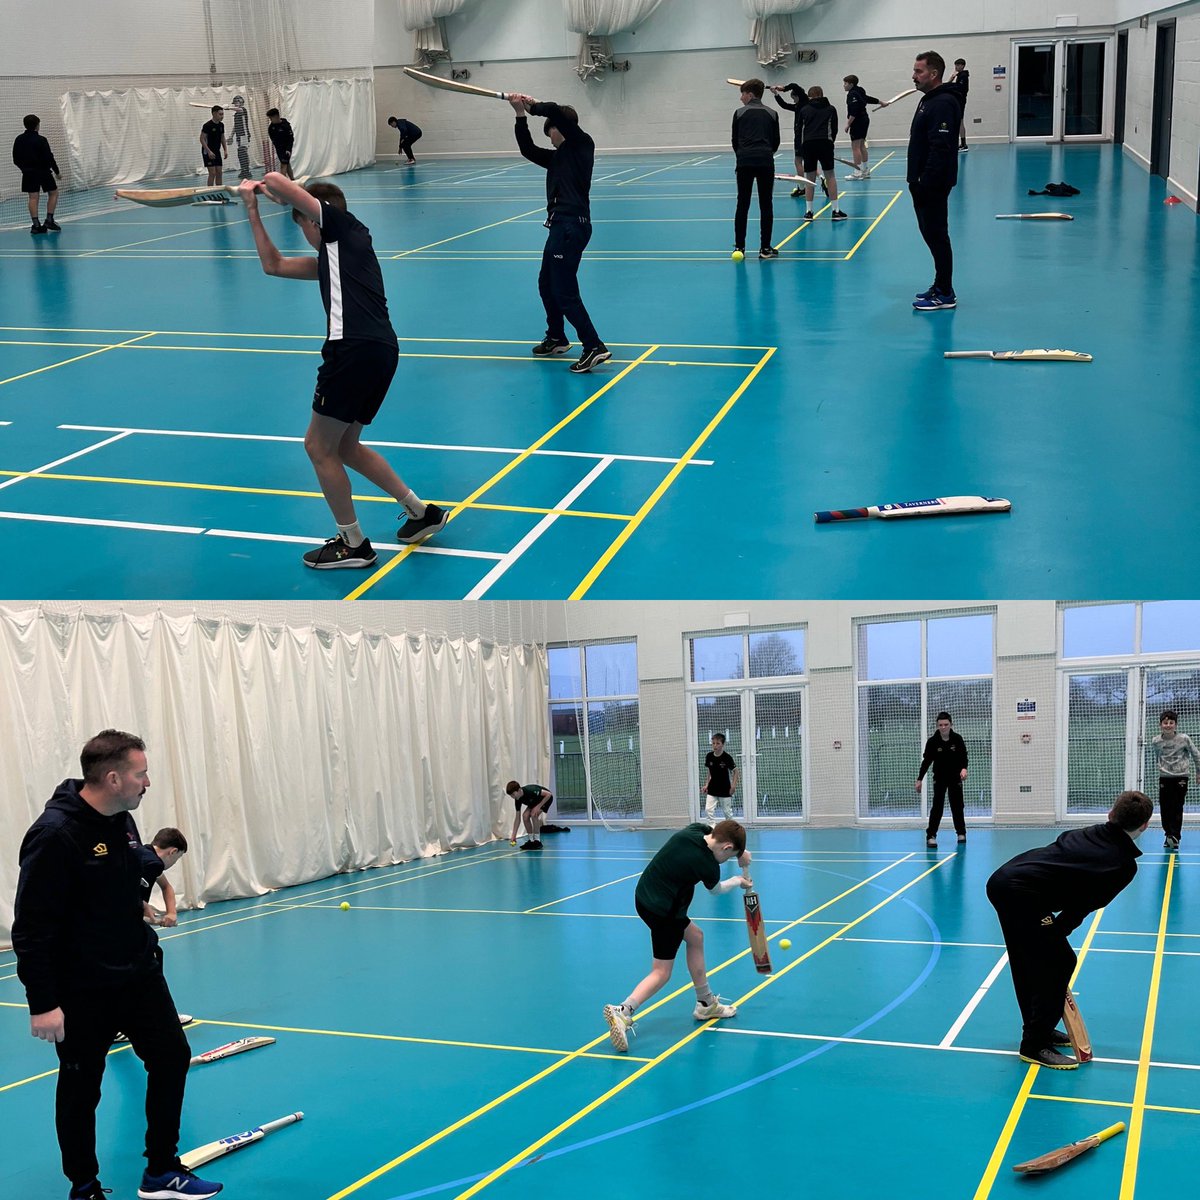 First full day of the winter programme in the warmth of the Neyland centre. Batting was the theme with in particular the U15 group working well and staying focused #👏👏#enjoyable @cwpathwayw @CricketWales